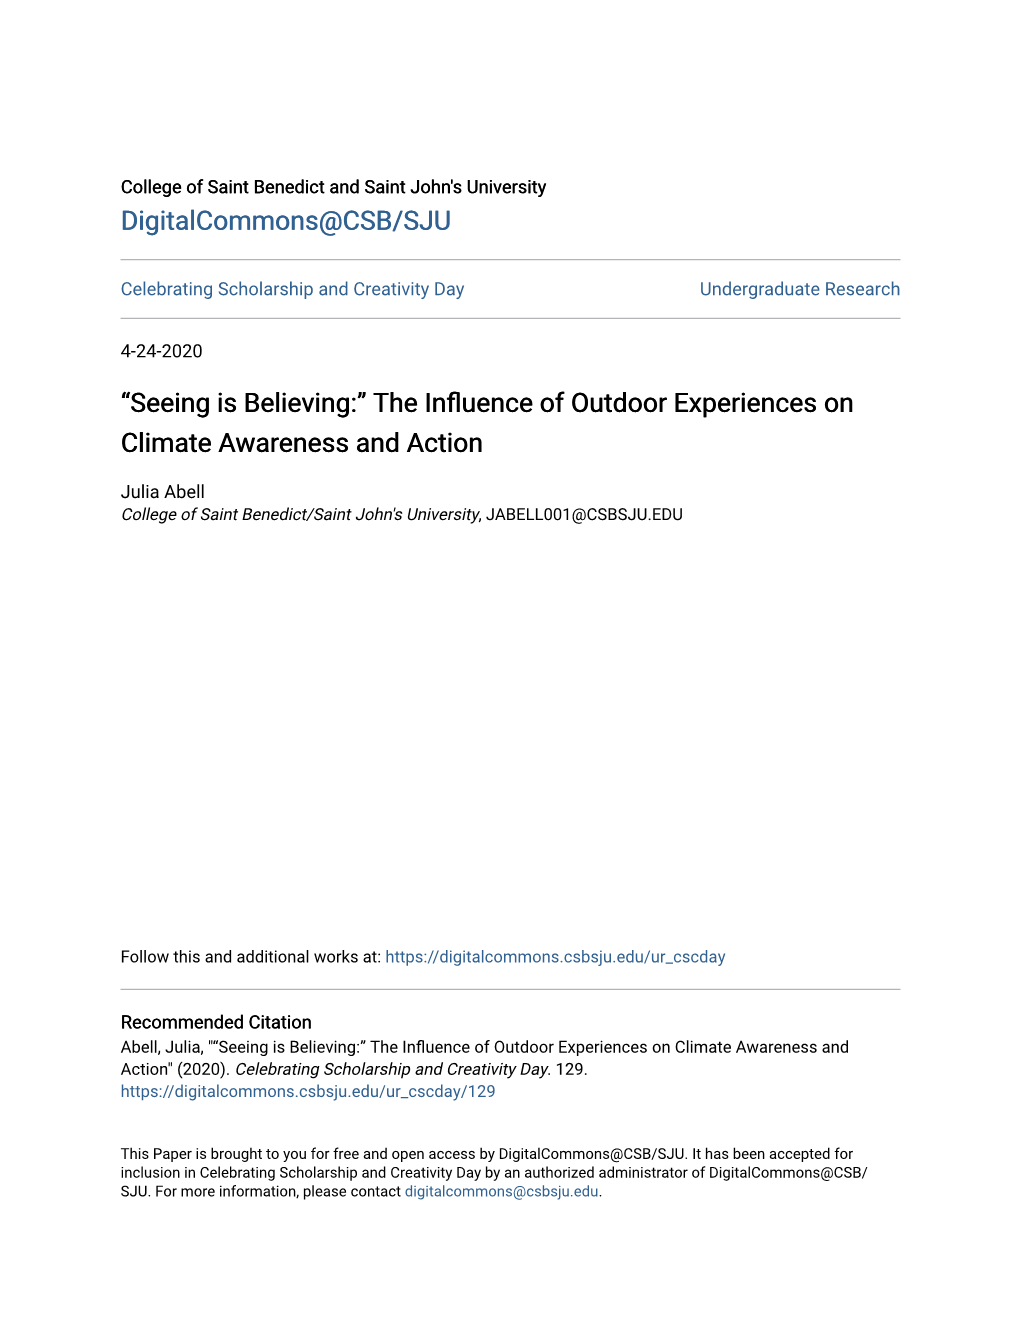 The Influence of Outdoor Experiences on Climate Awareness and Action